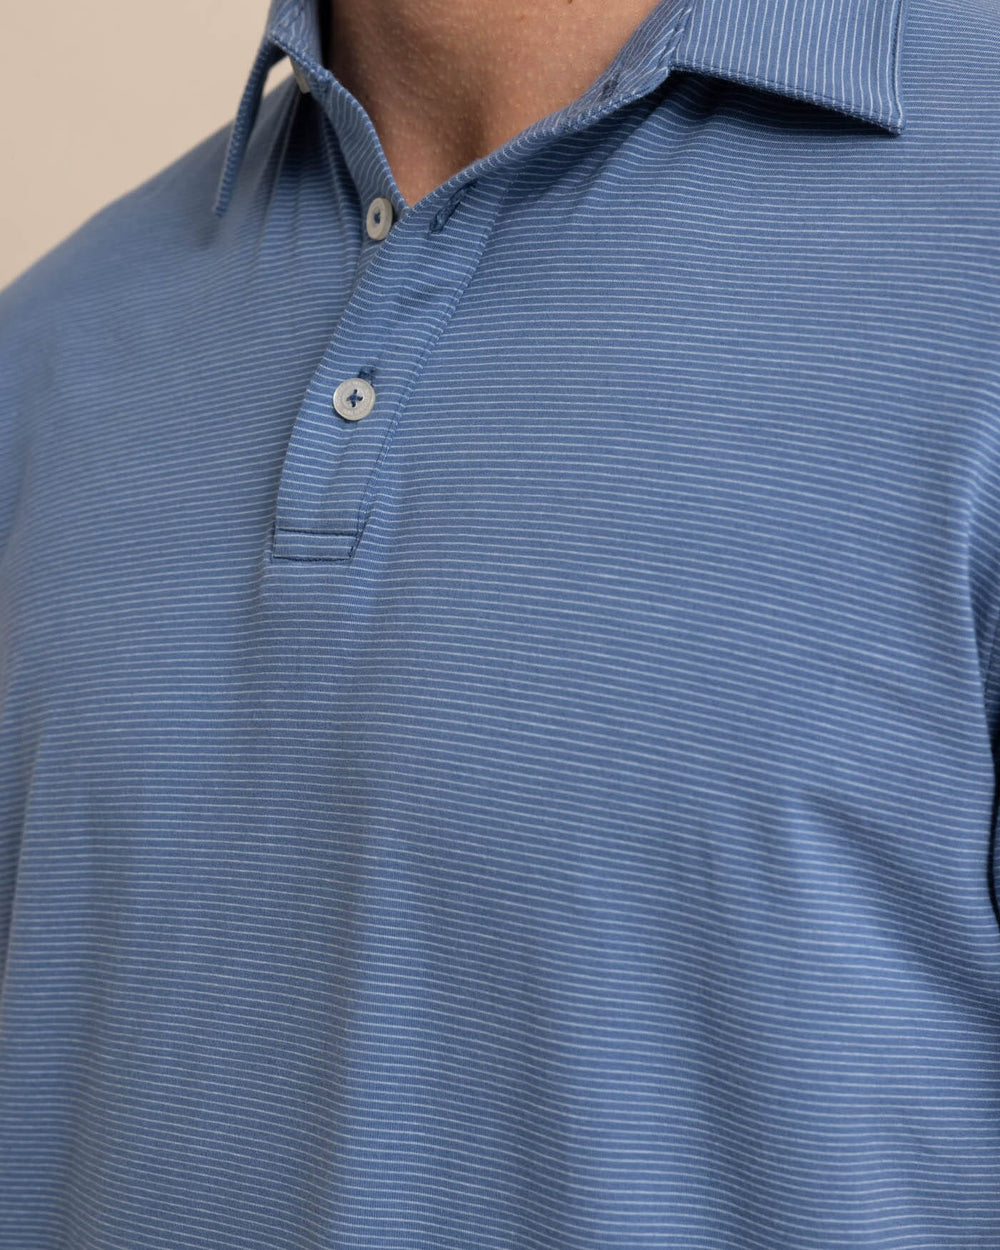 The detail view of the Southern Tide The Seaport Davenport Stripe Polo by Southern Tide - Coronet Blue